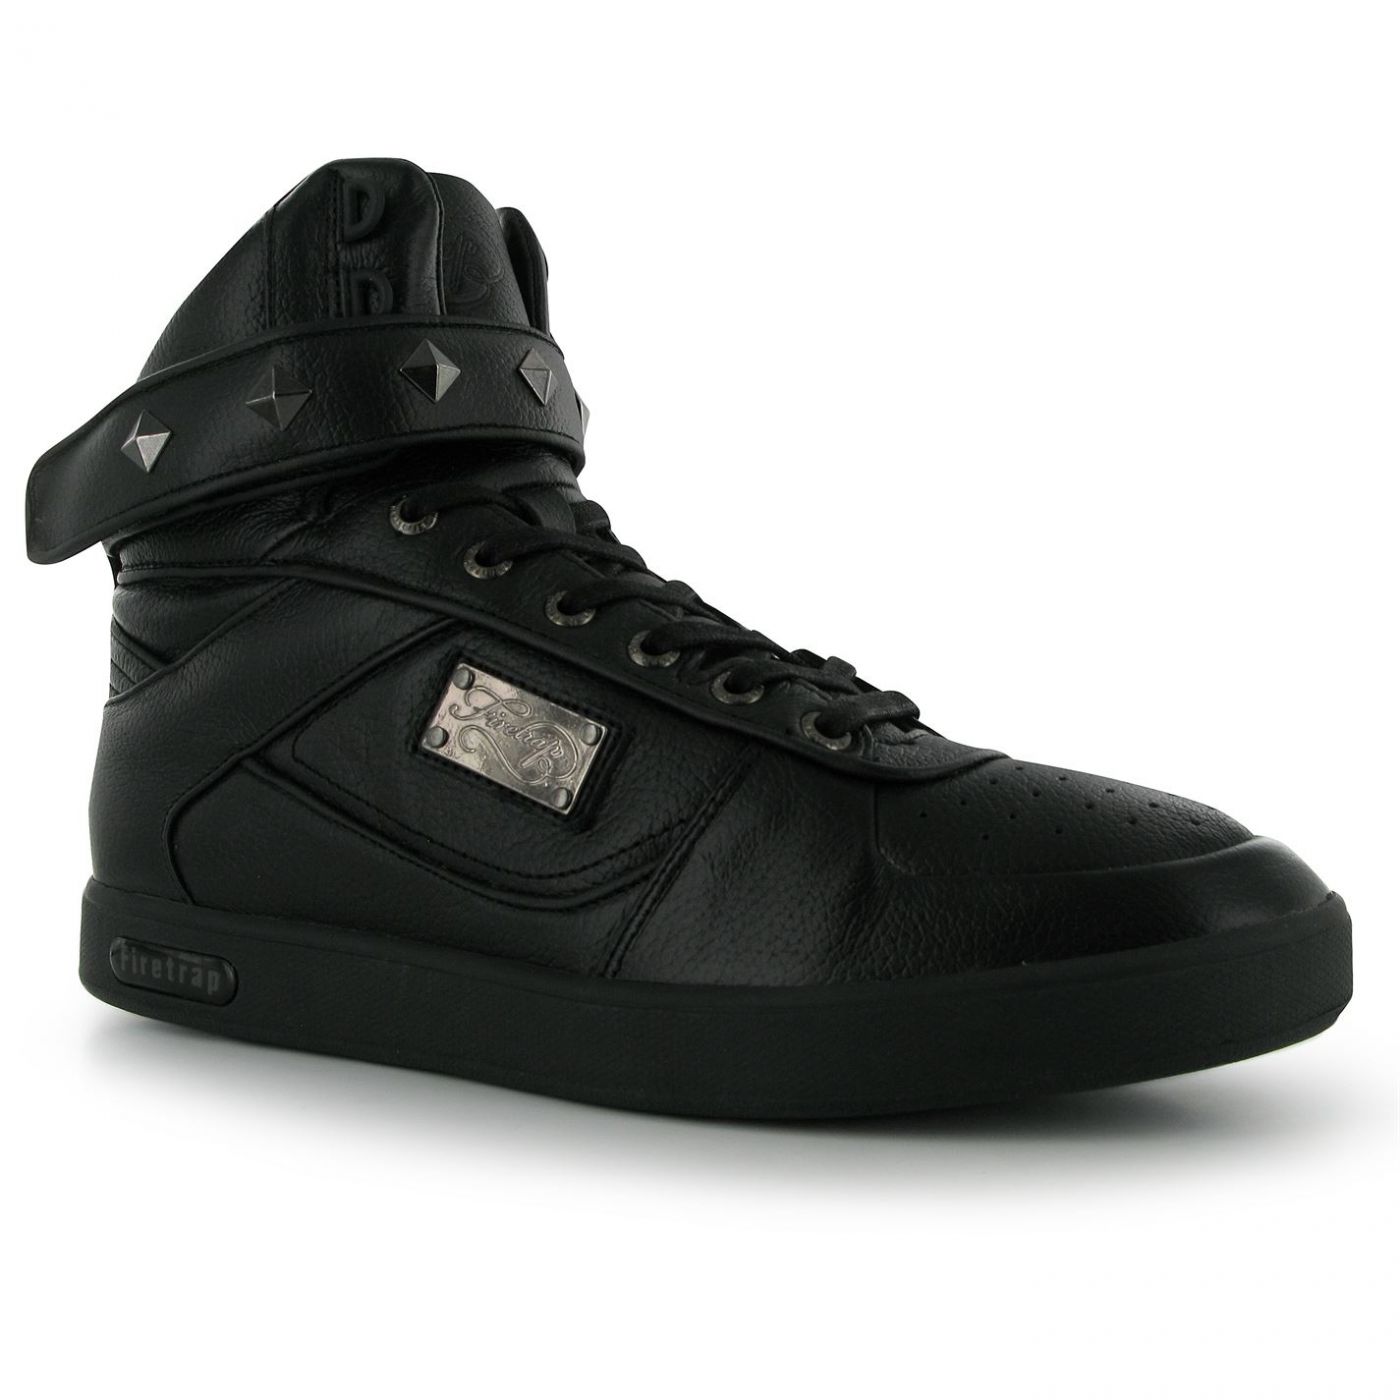 Firetrap Bliss Ladies High Top Trainers